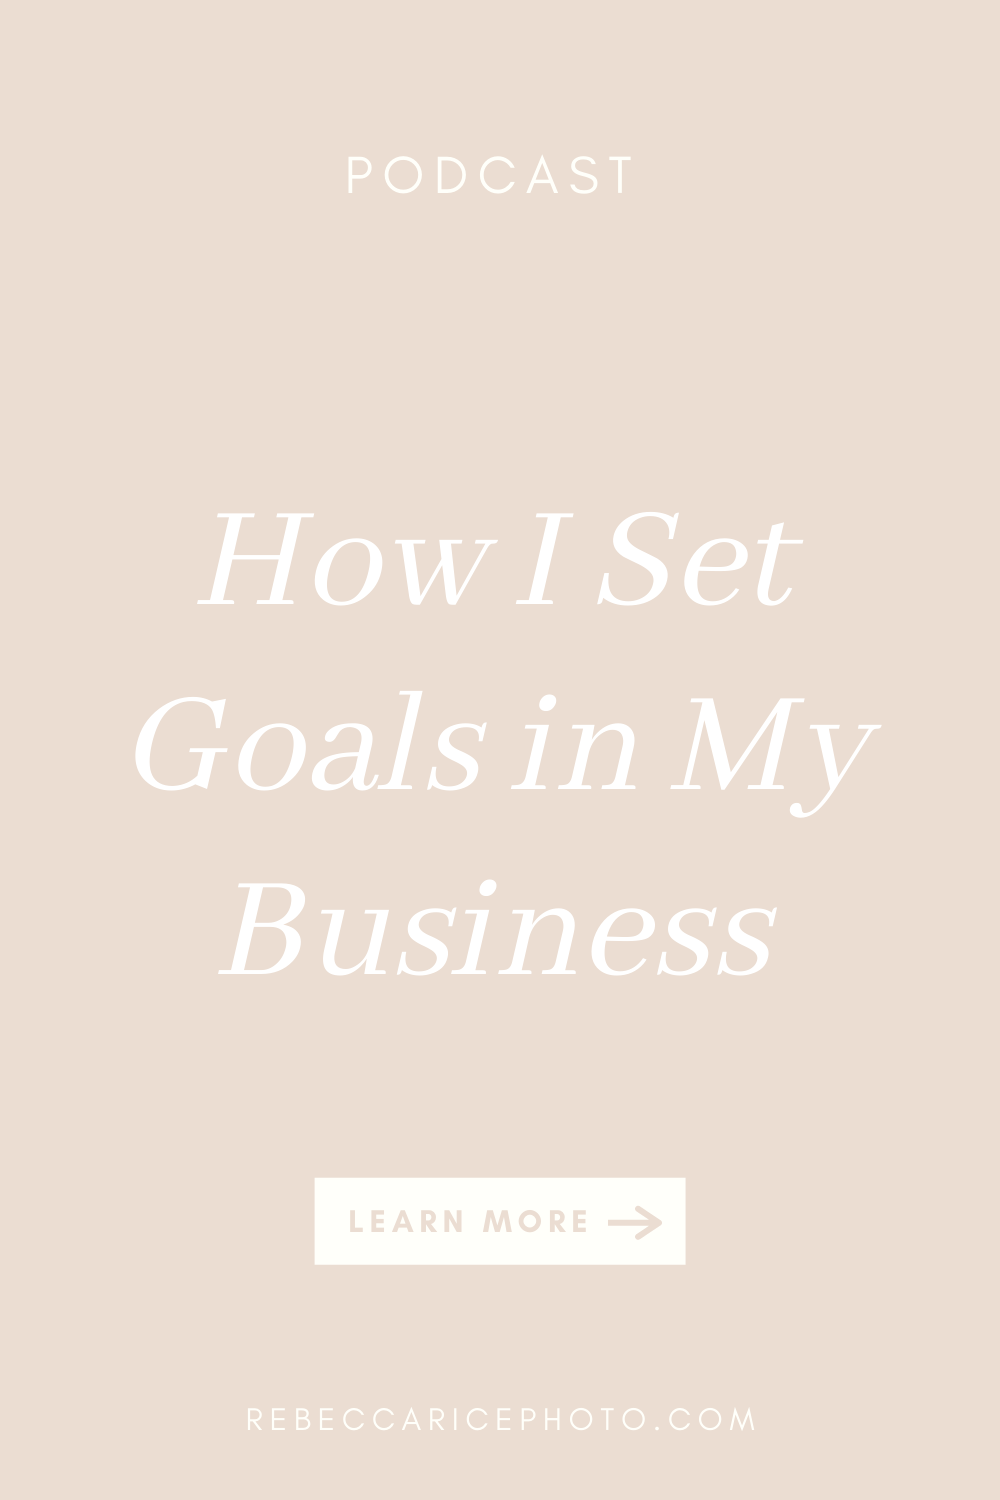 How I Set Goals in My Business as a Photographer and Educator: tips shared by Rebecca Rice on the Business Journey Podcast